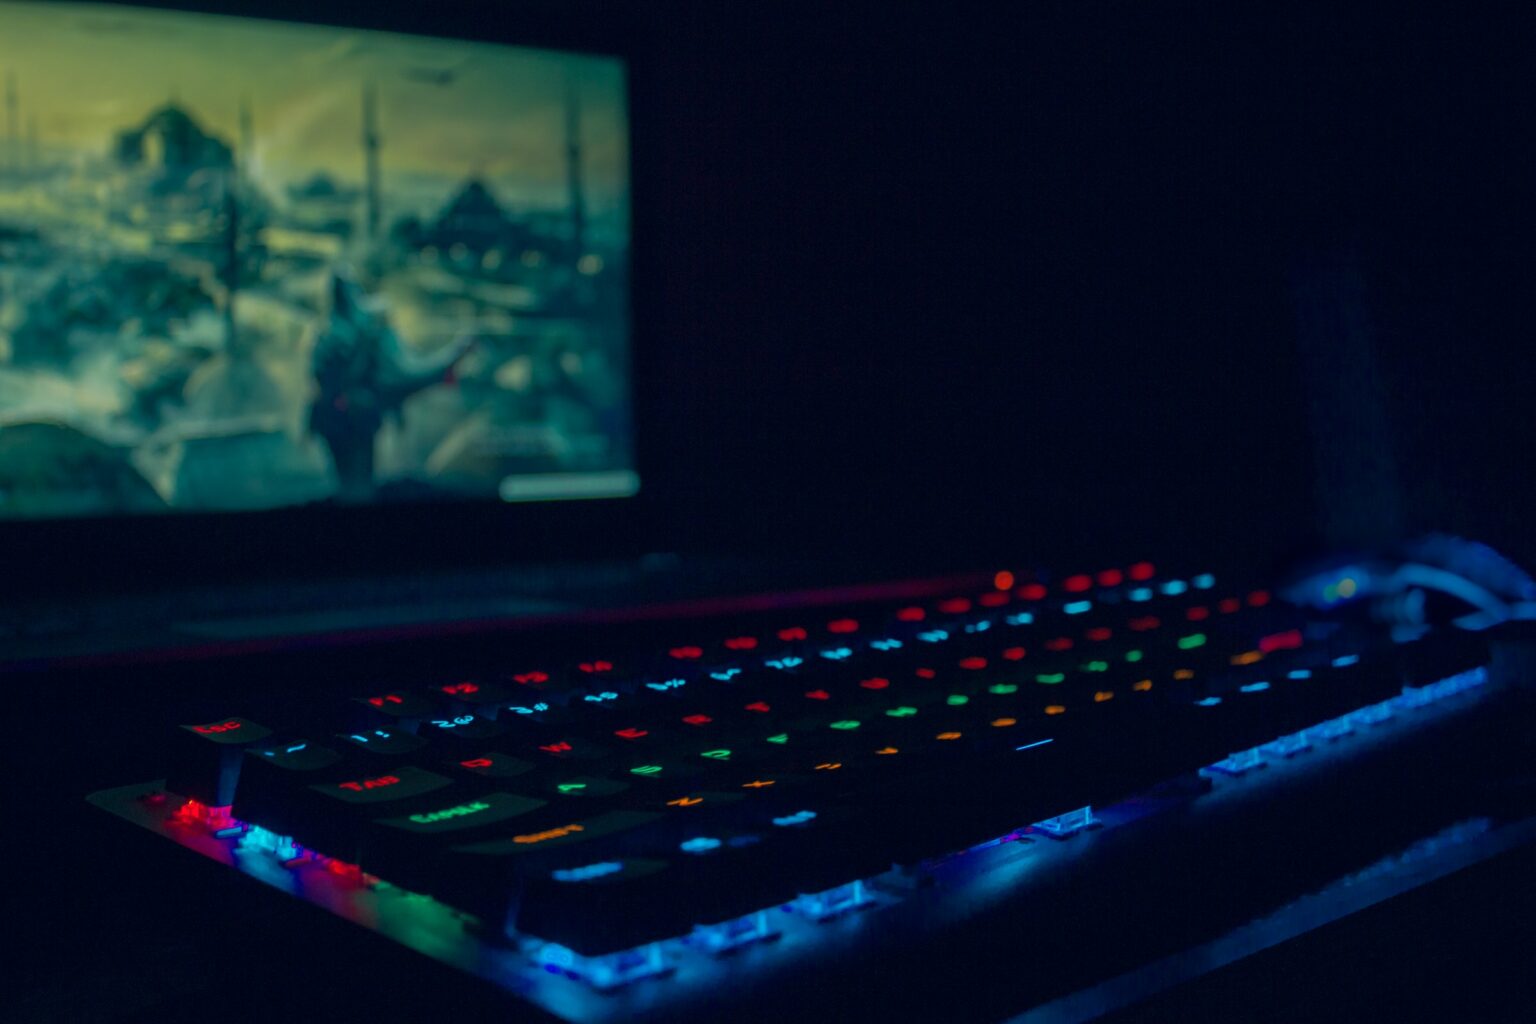 A gaming PC keyboard with colorful RGB lighting sits in front of a computer monitor in a darkened room.